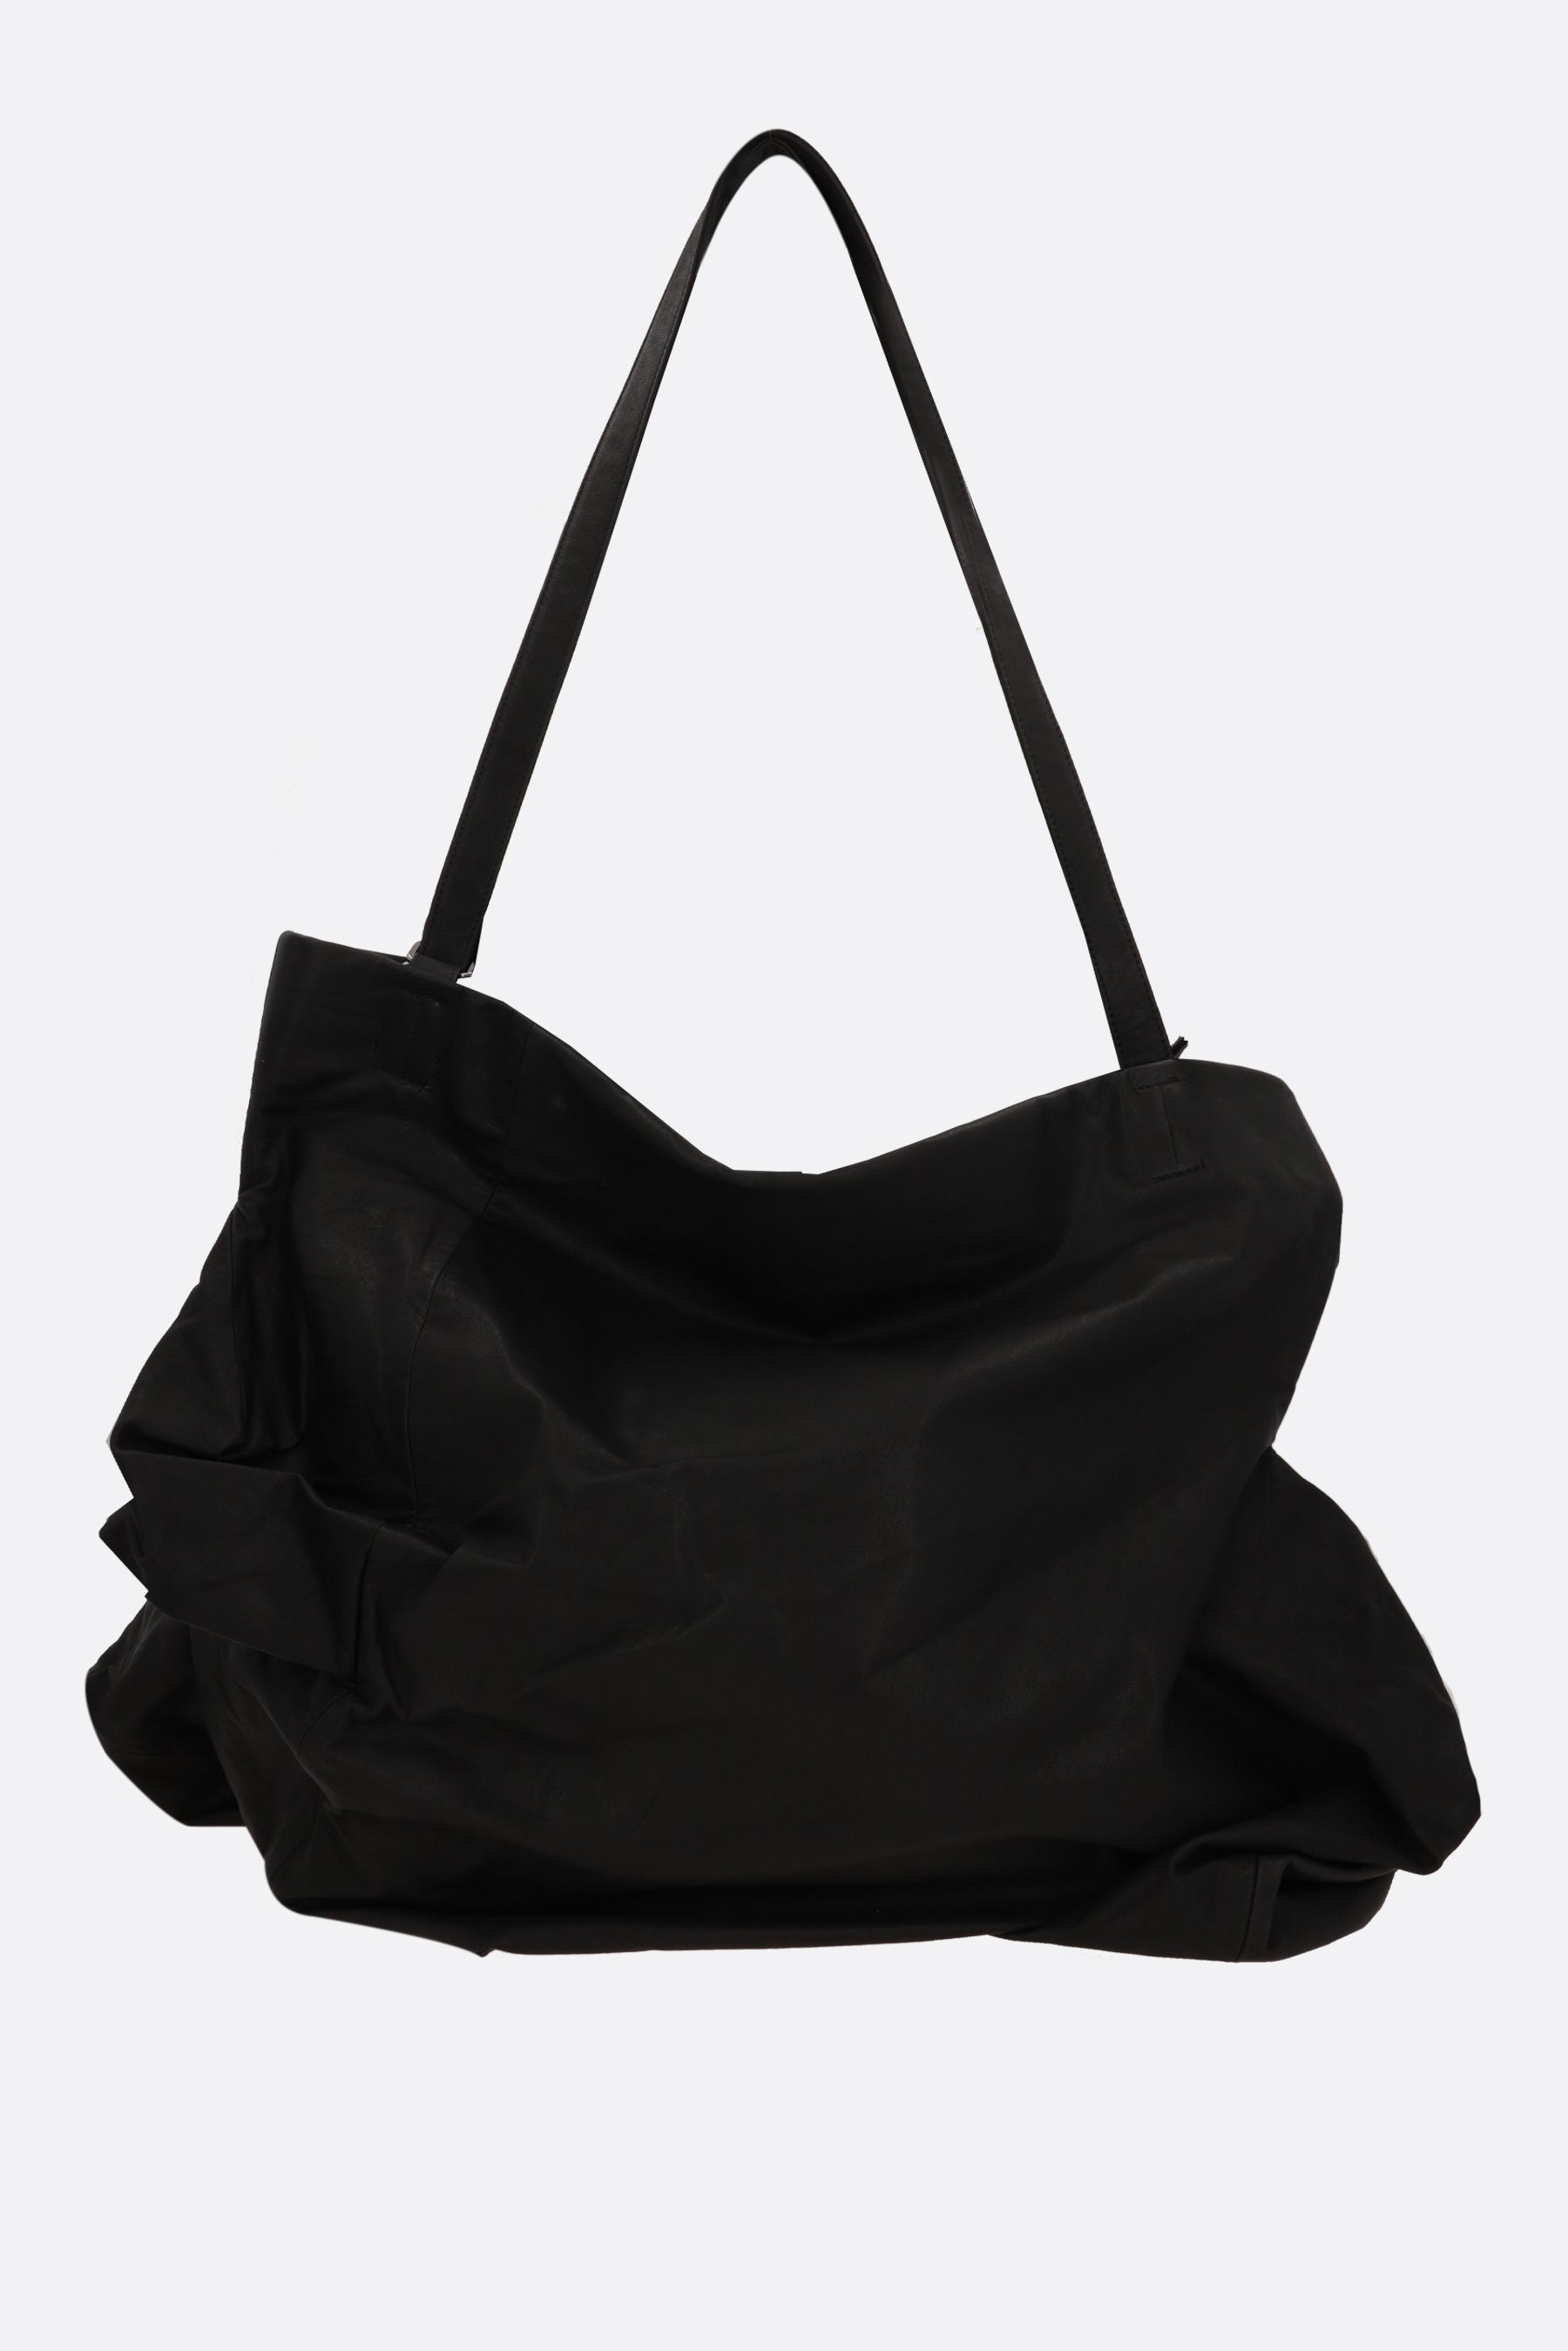 Unevenness smooth leather tote bag